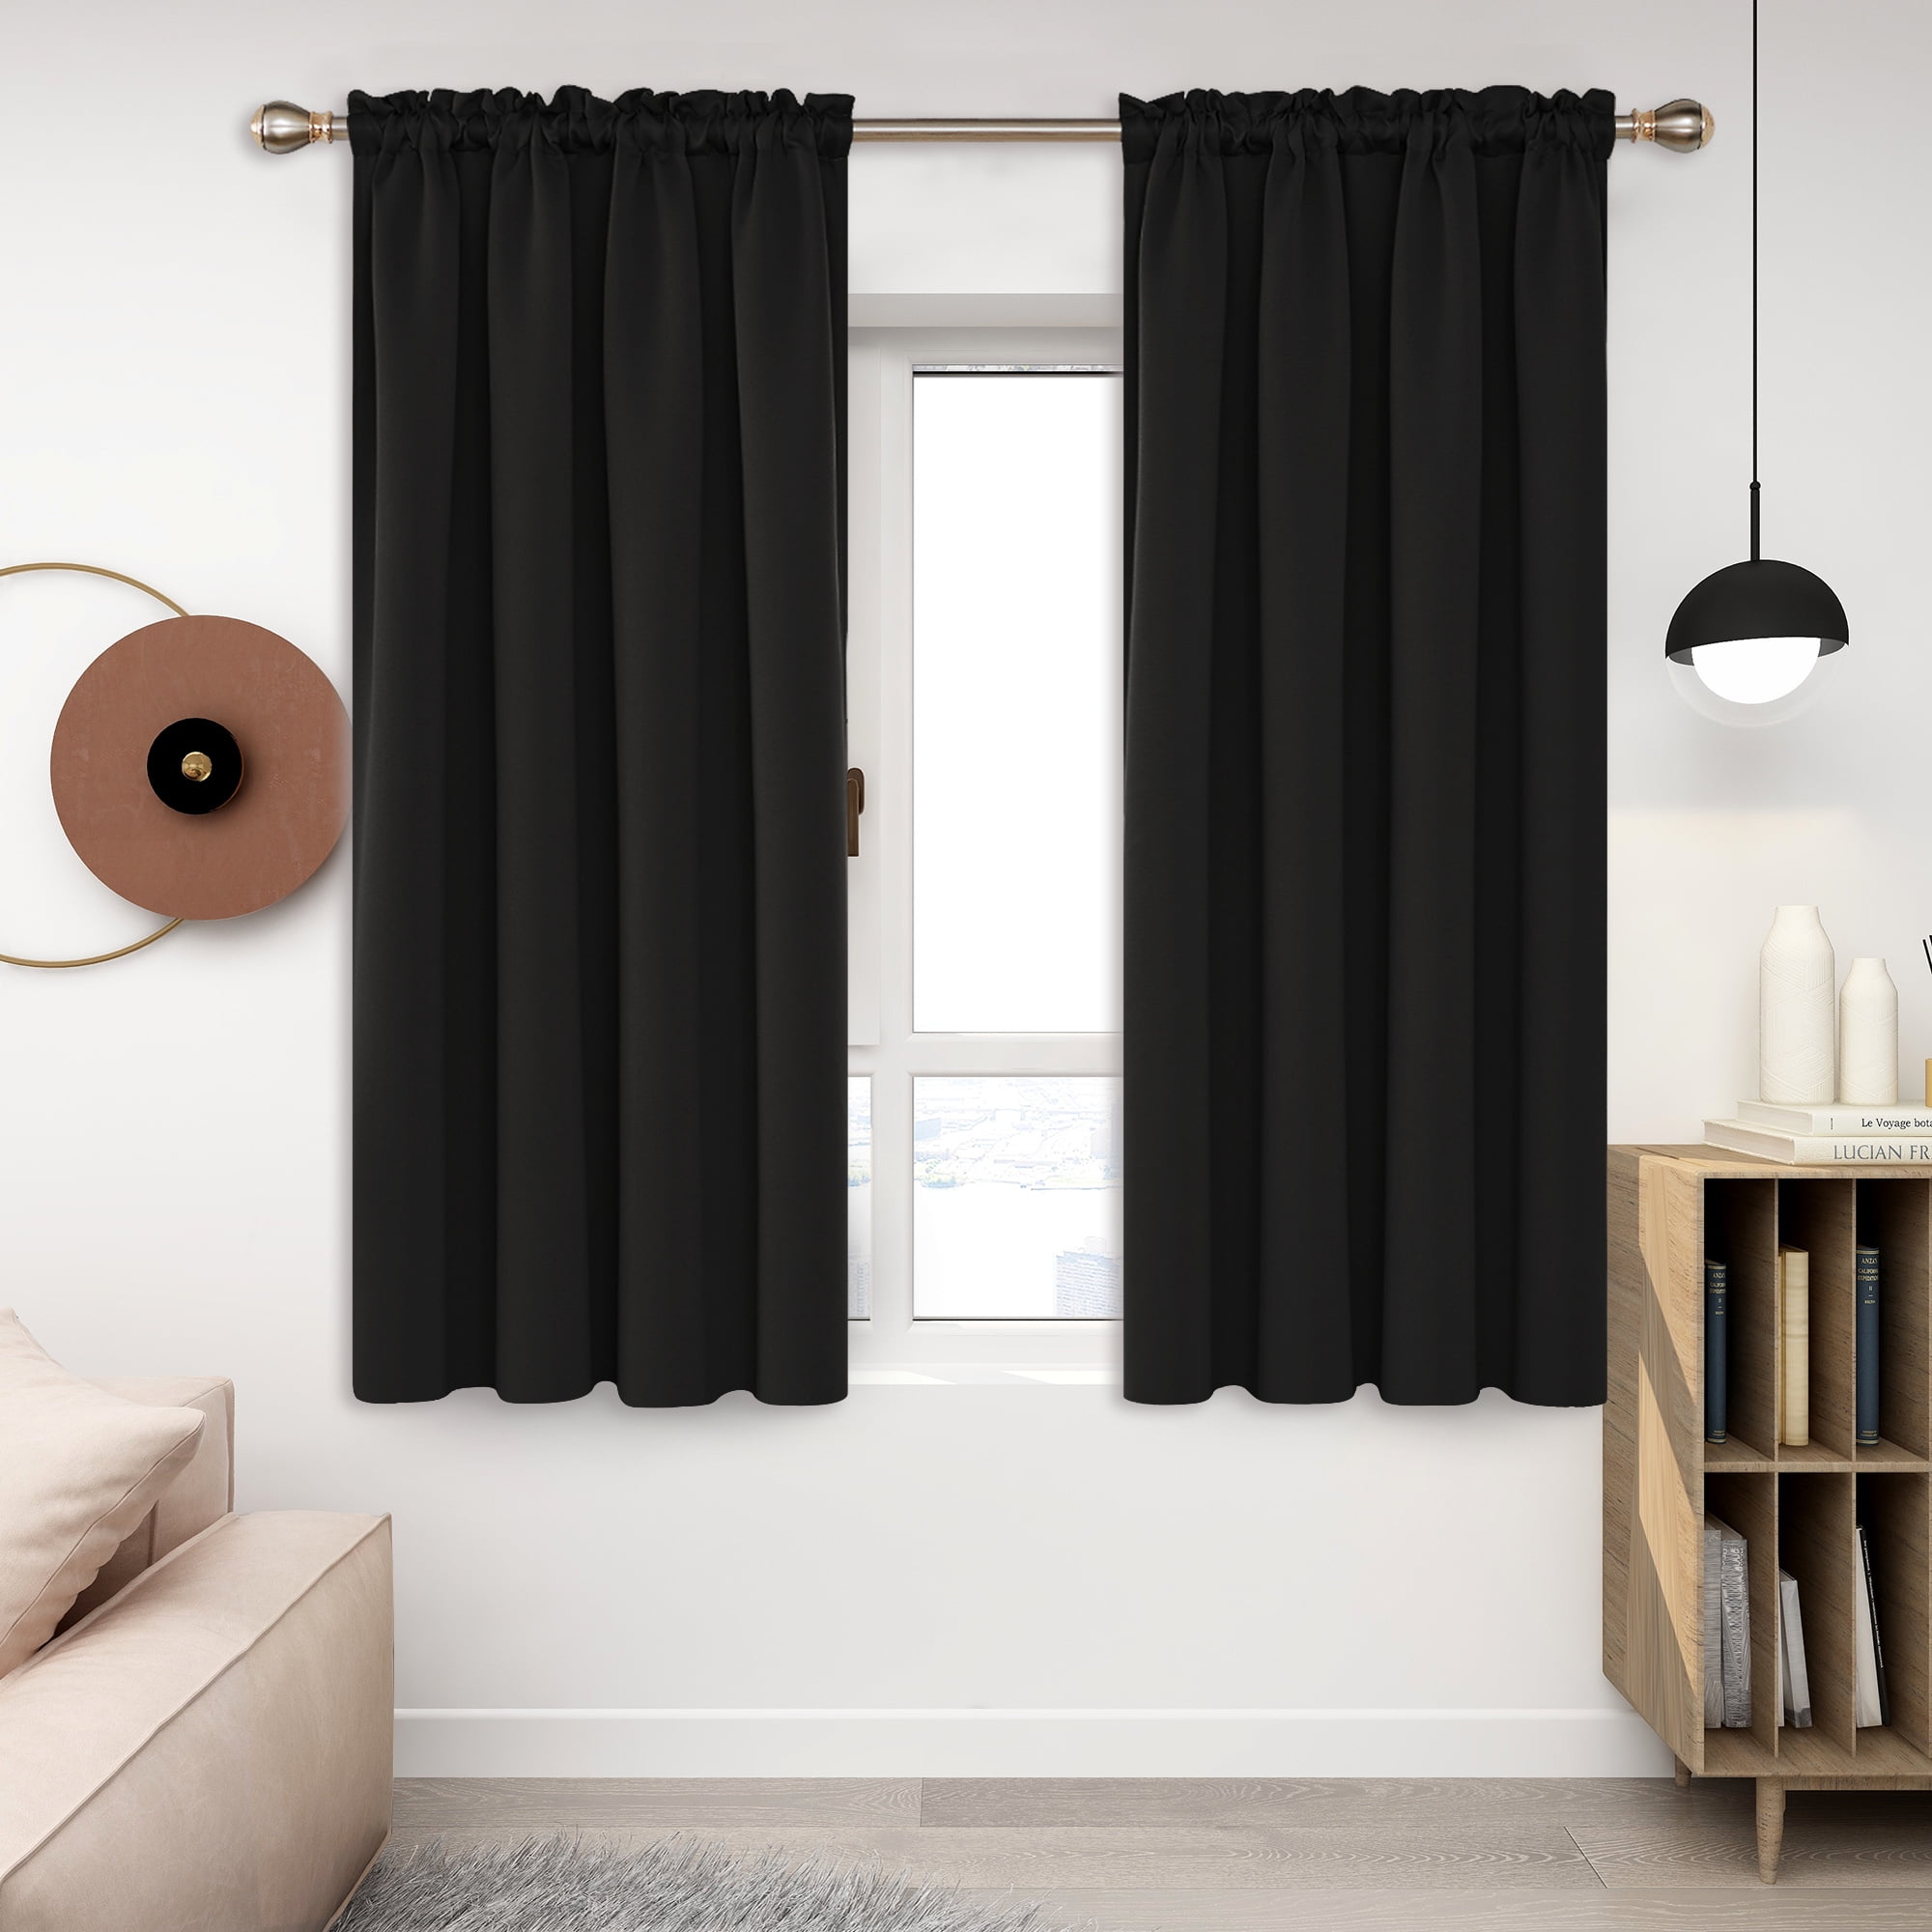 2 Panels, 42x63 in Noise Reducing Panels for Living Room Deconovo Room Darkening Thermal Insulated Grommet Black Blackout Curtains